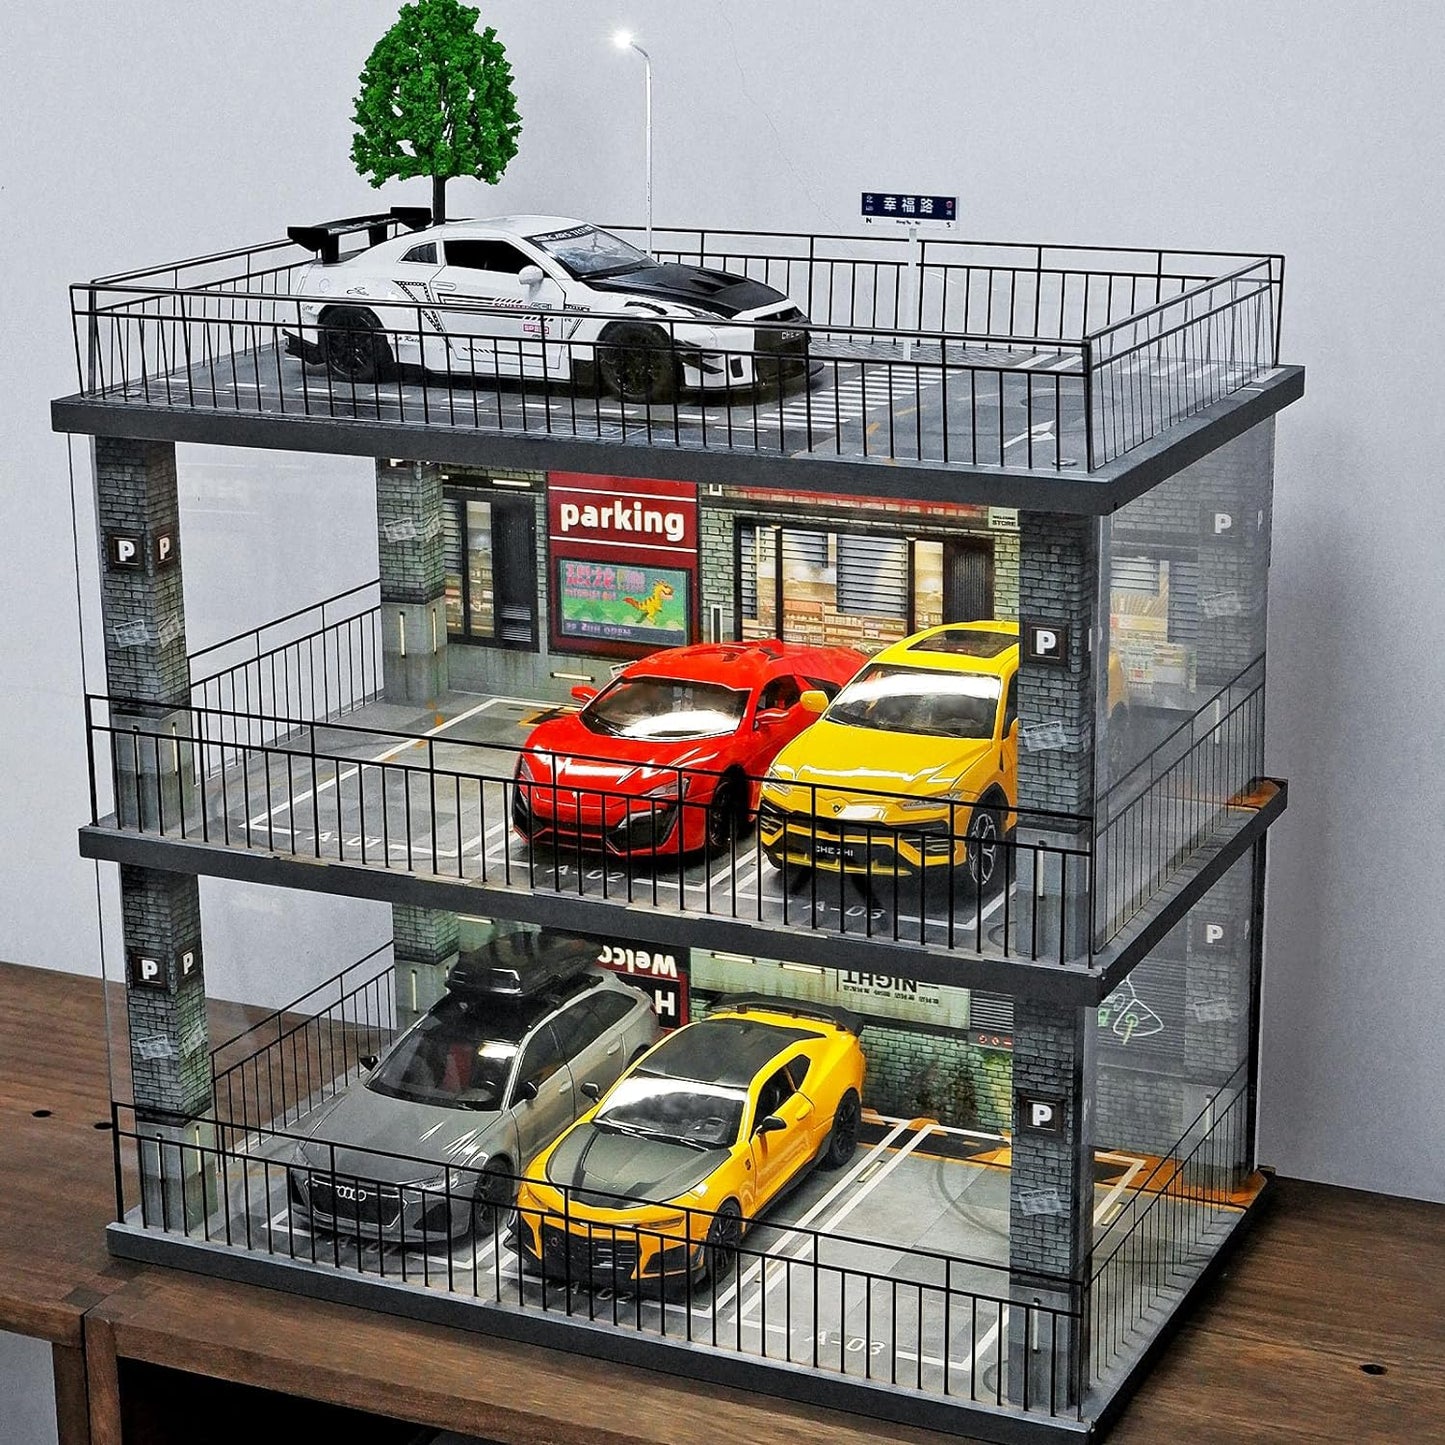 1:24 Scale Diecast Model Car Display Case Cabinet with USB Lights and Acrylic Cover,Diorama Garage for Sport Cars and Lego Speed Champions Car Collectibles